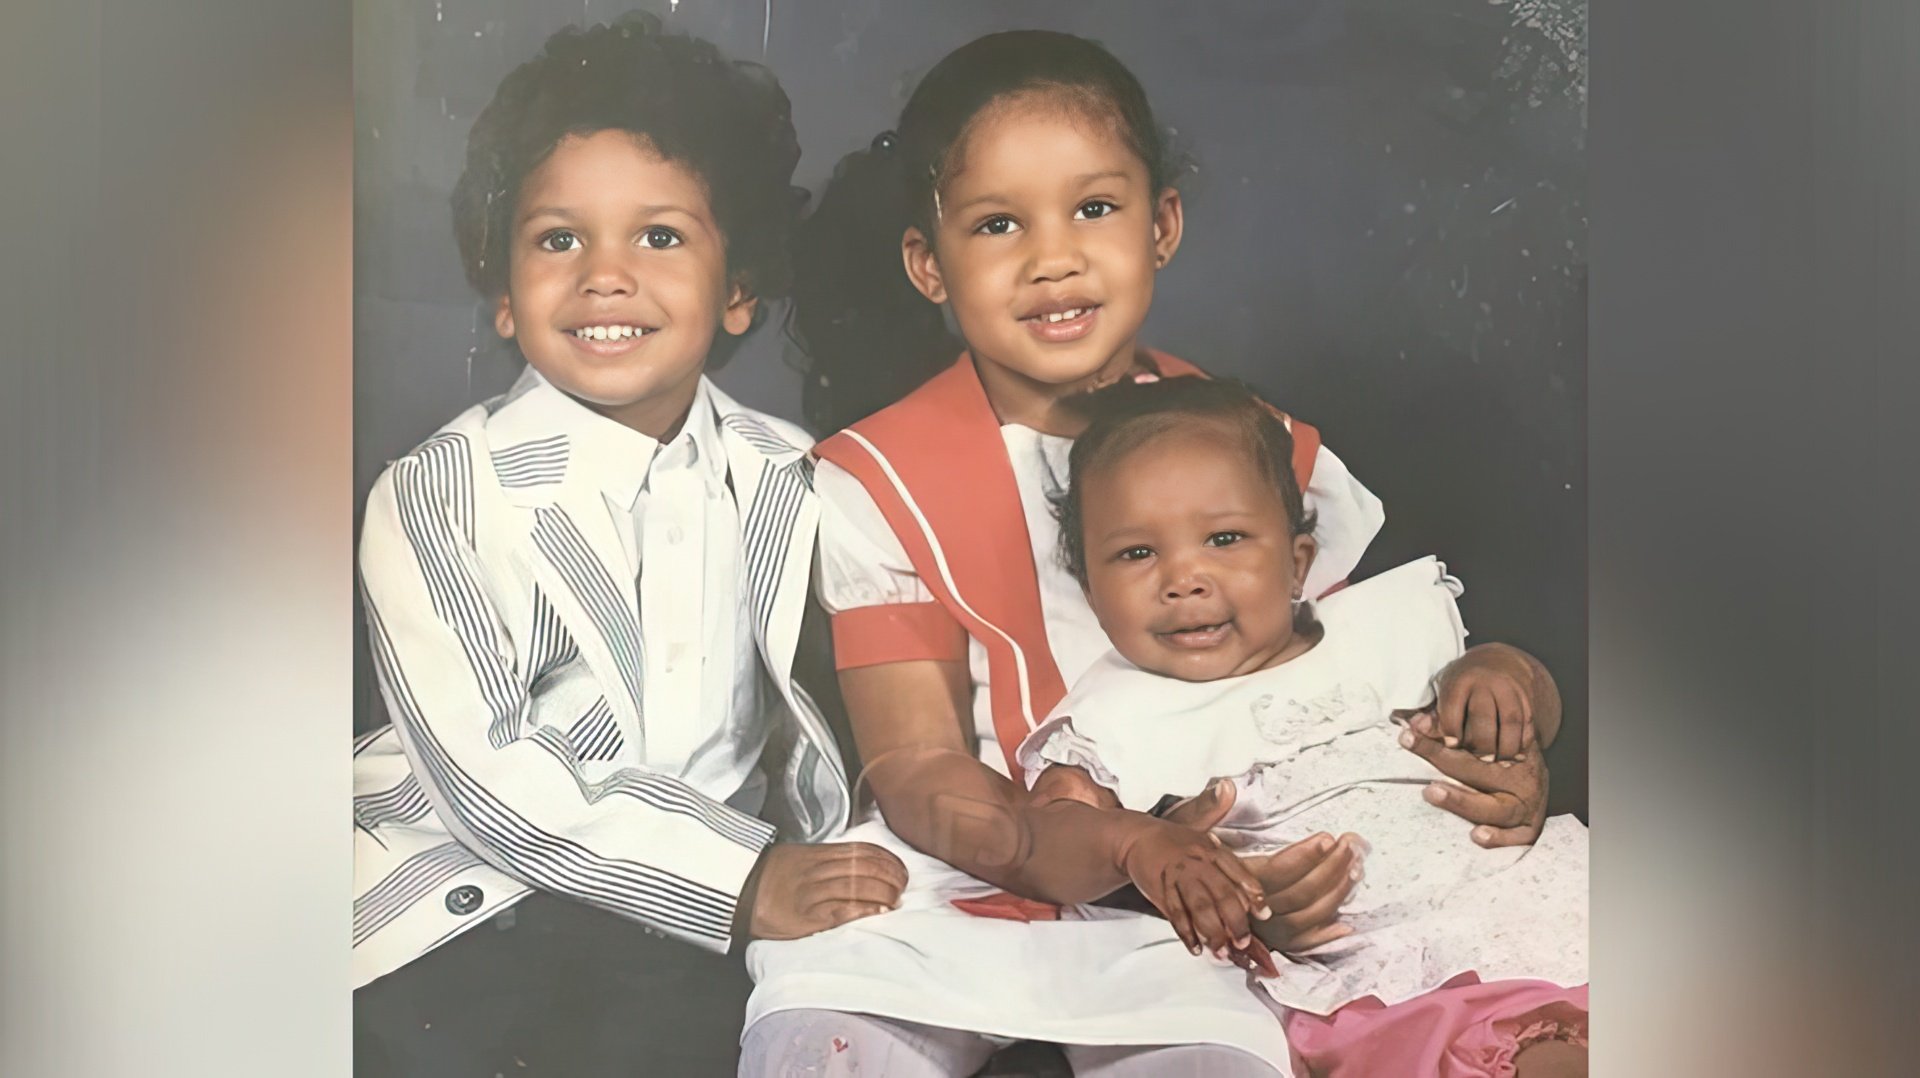 Lizzo (right) as a child with her brother and sister